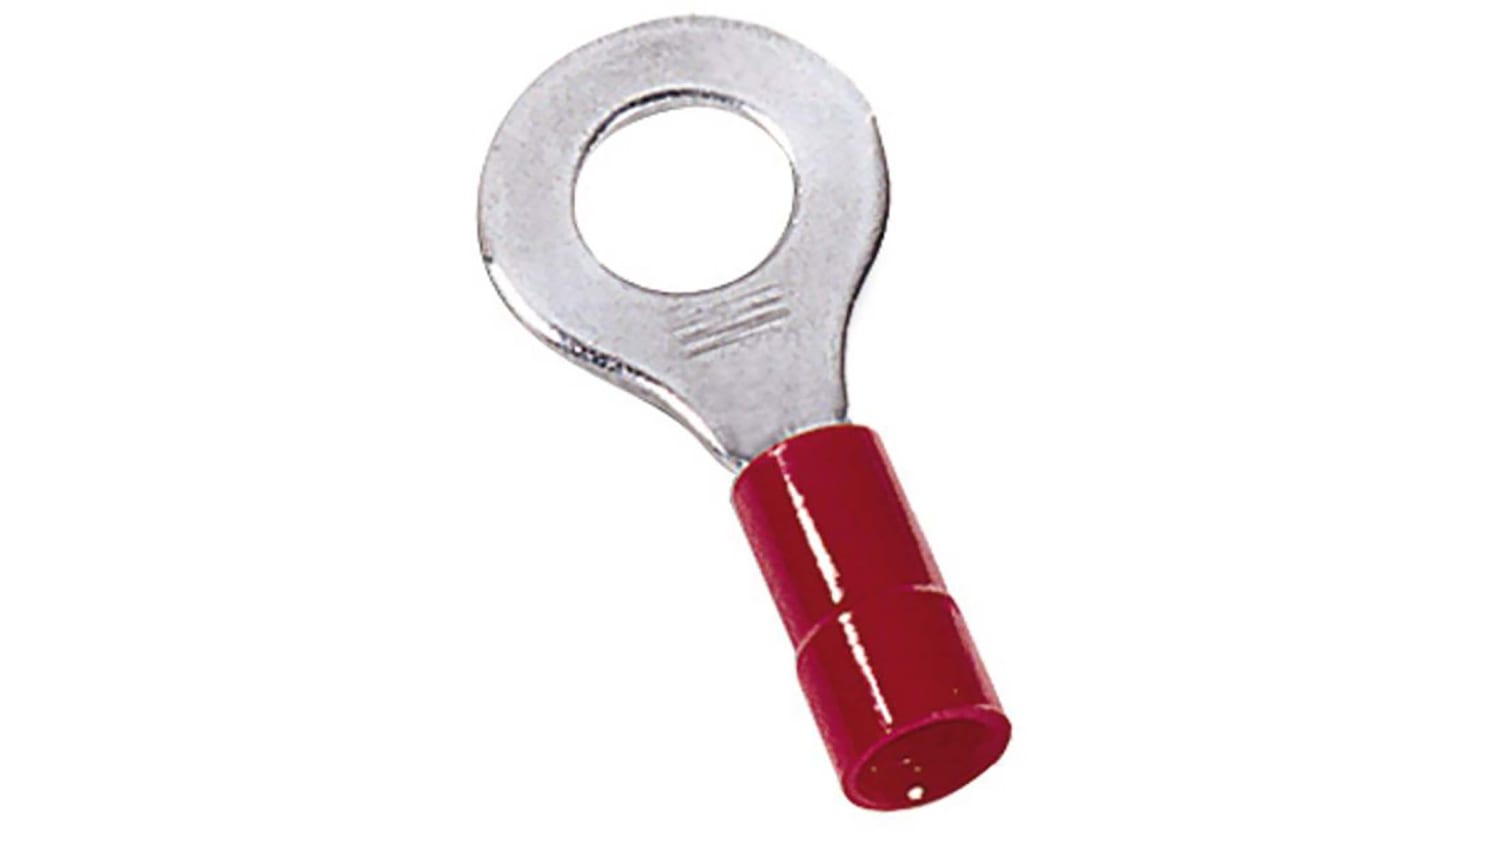 C100 2 Mecatraction Insulated Ring Terminal M4 Stud Size To 1 5mm Wire Size Red Rs